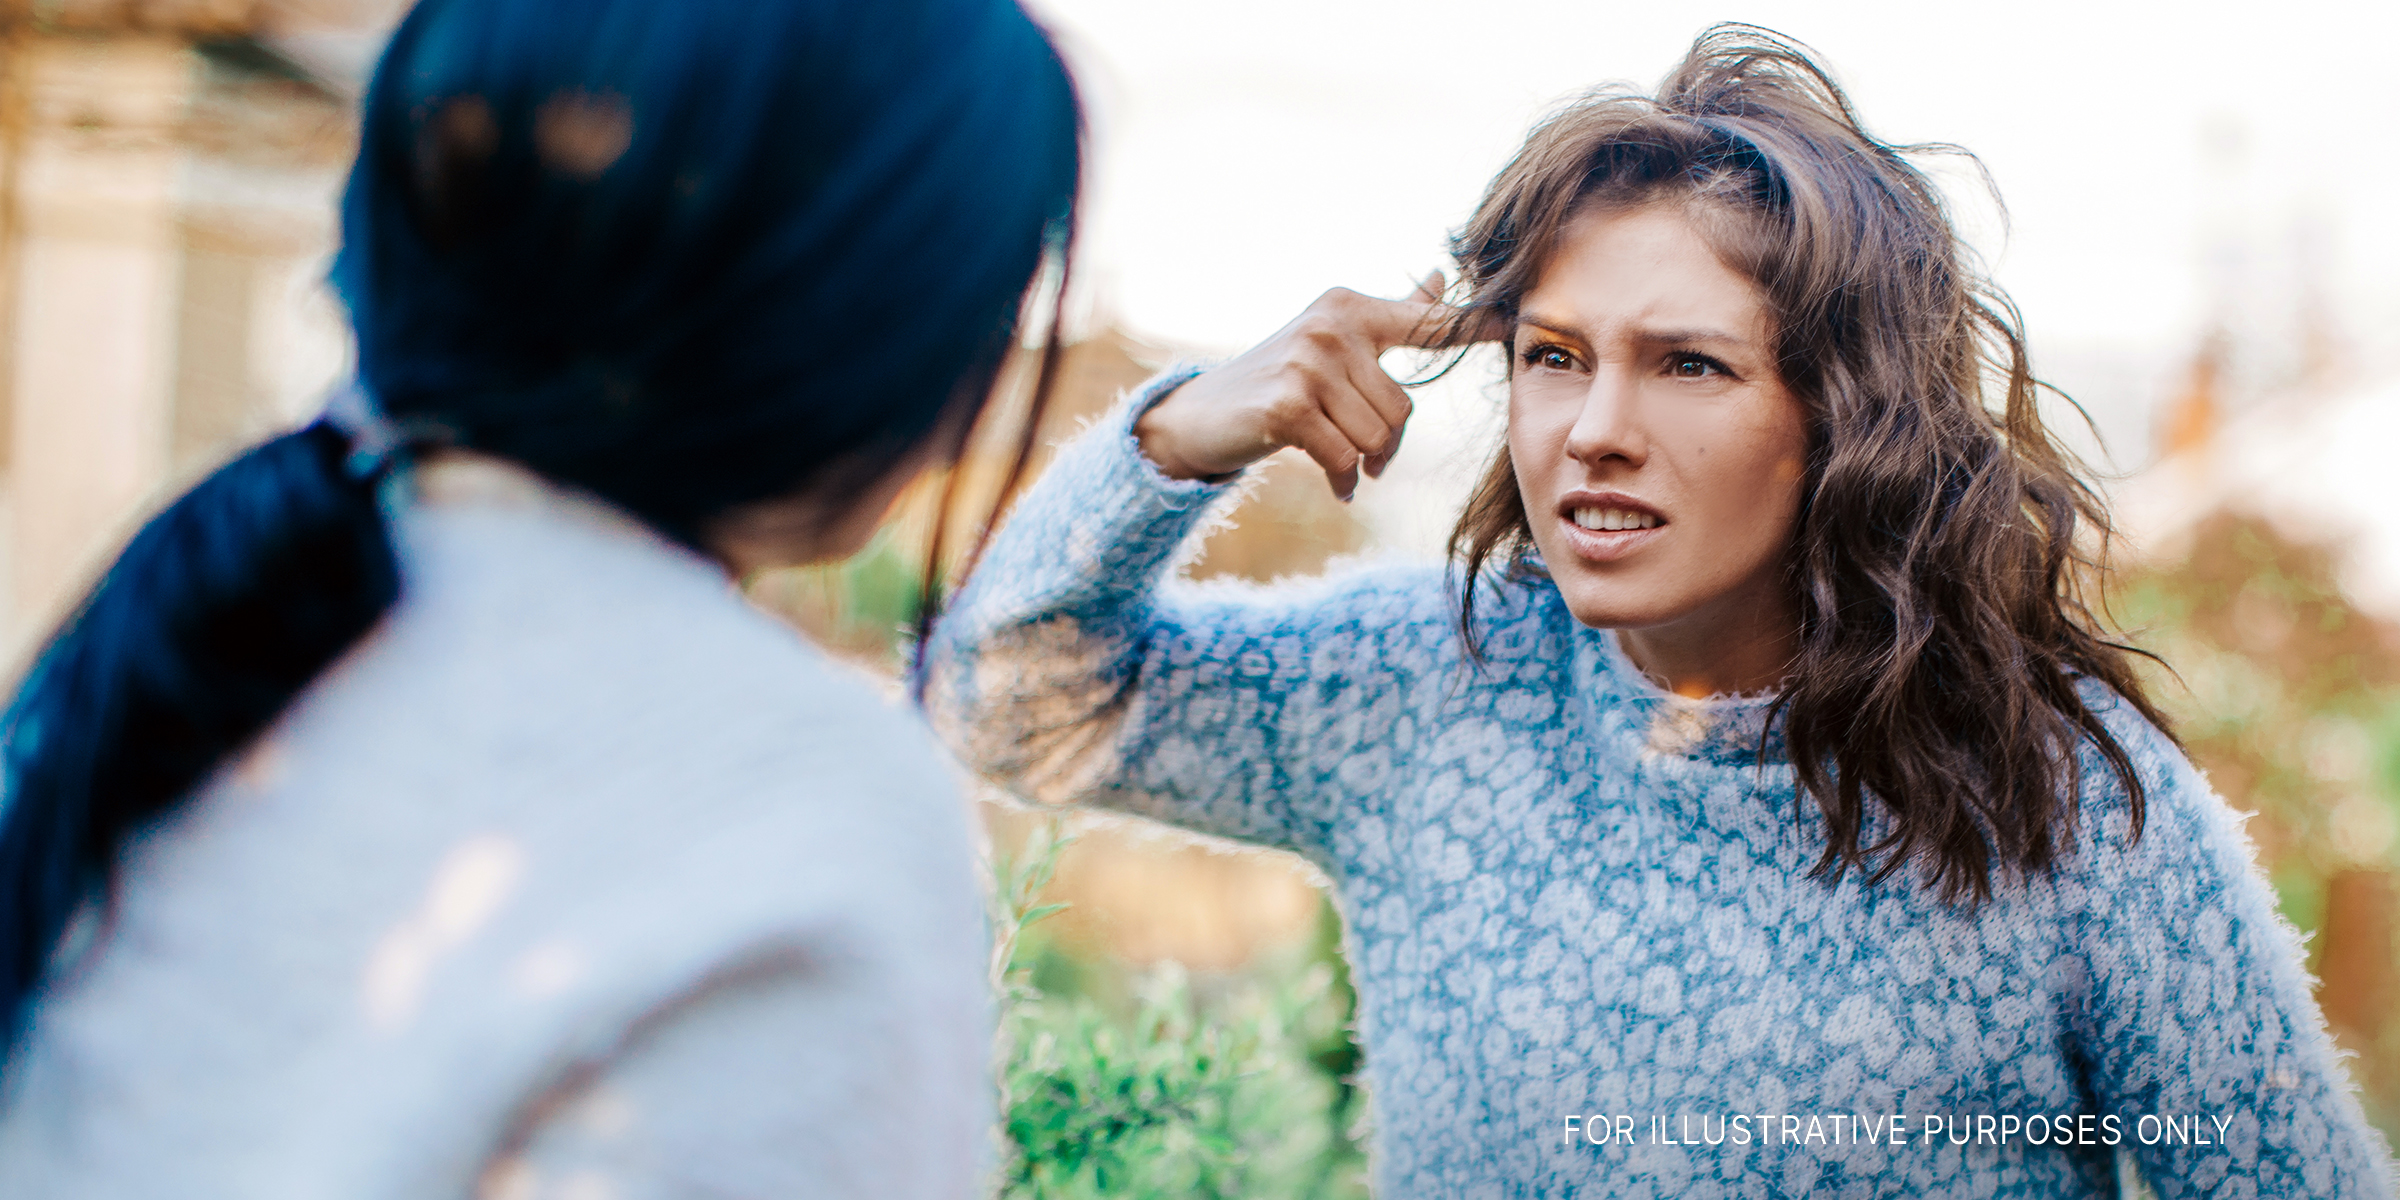 Upset person with her hand to her head | Source: Shutterstock